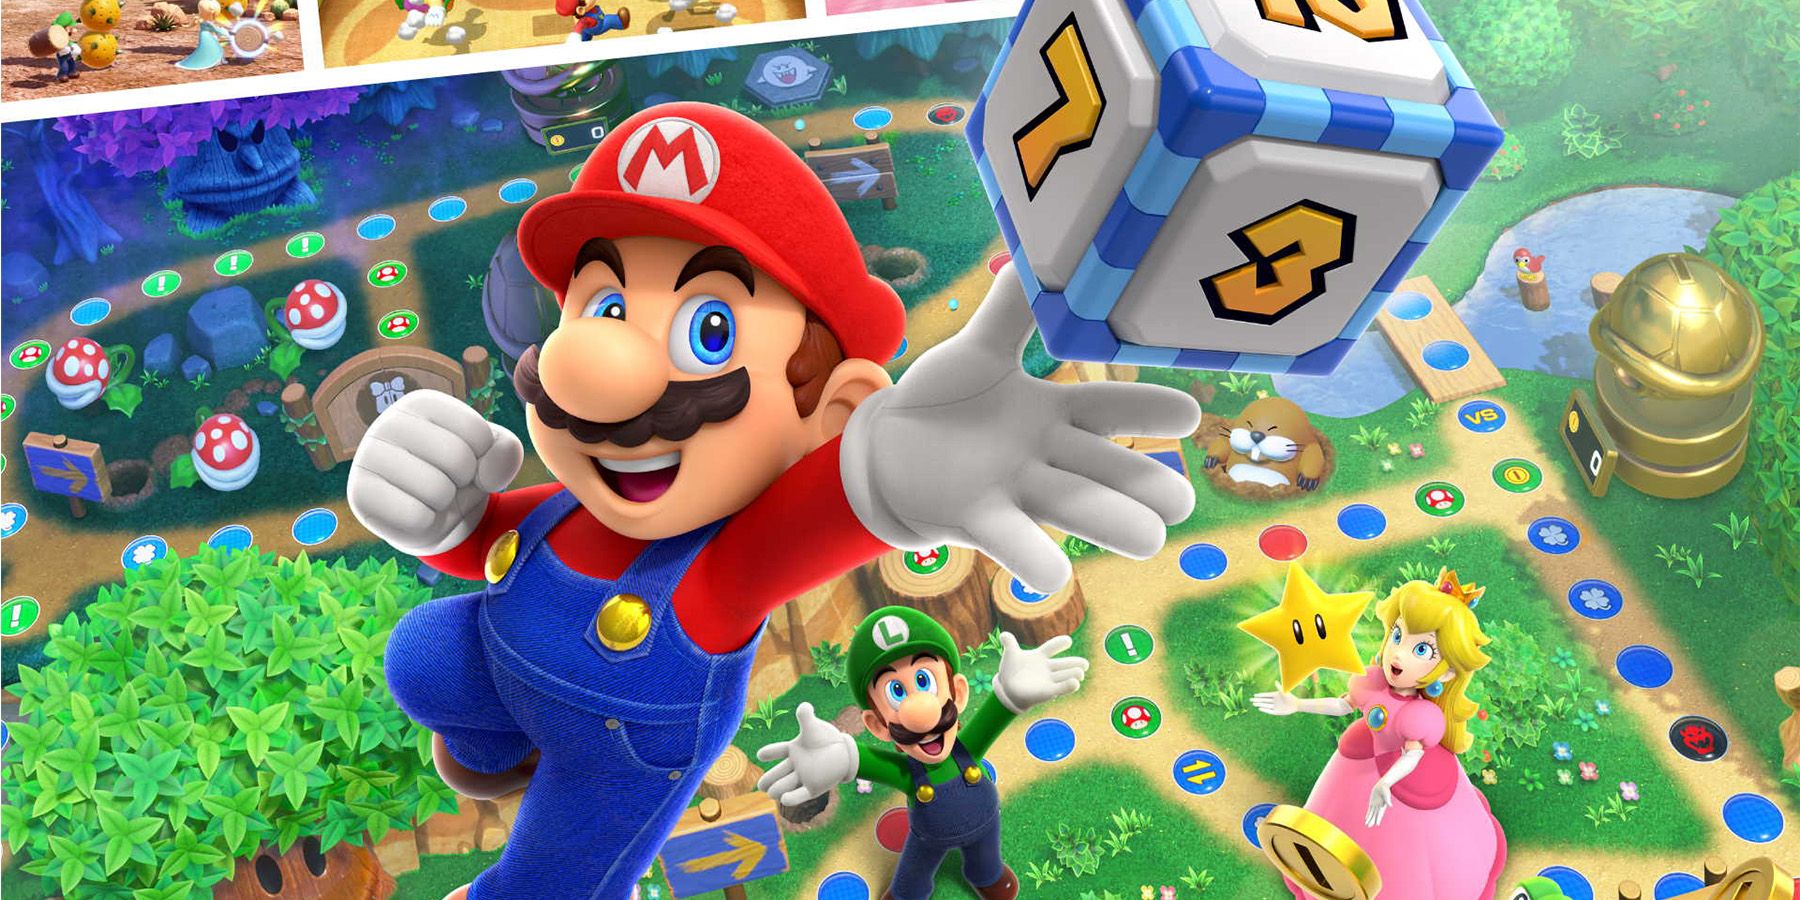 Mario Party Superstars promo of Mario leaping to grab dice in grassy board game